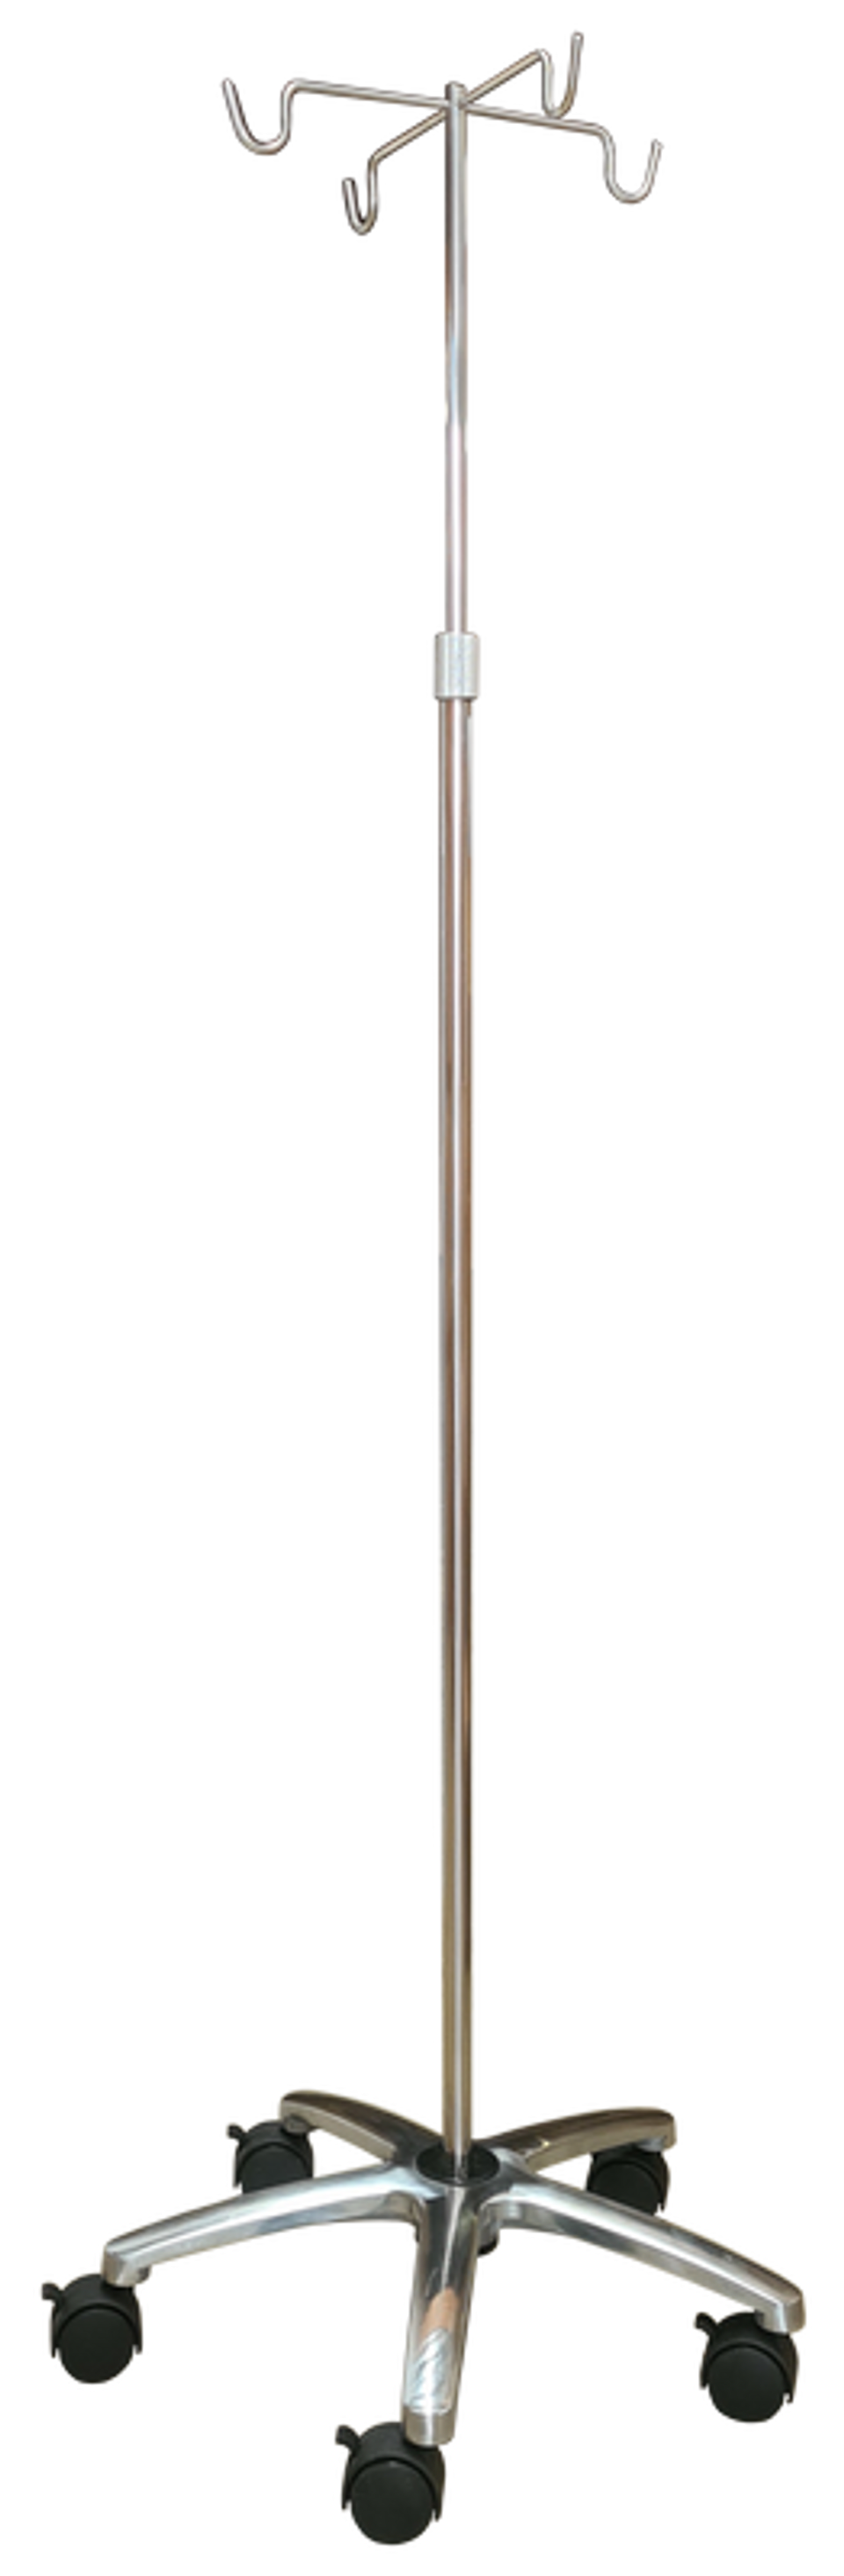 RIV303 STAINLESS STEEL IV POLE